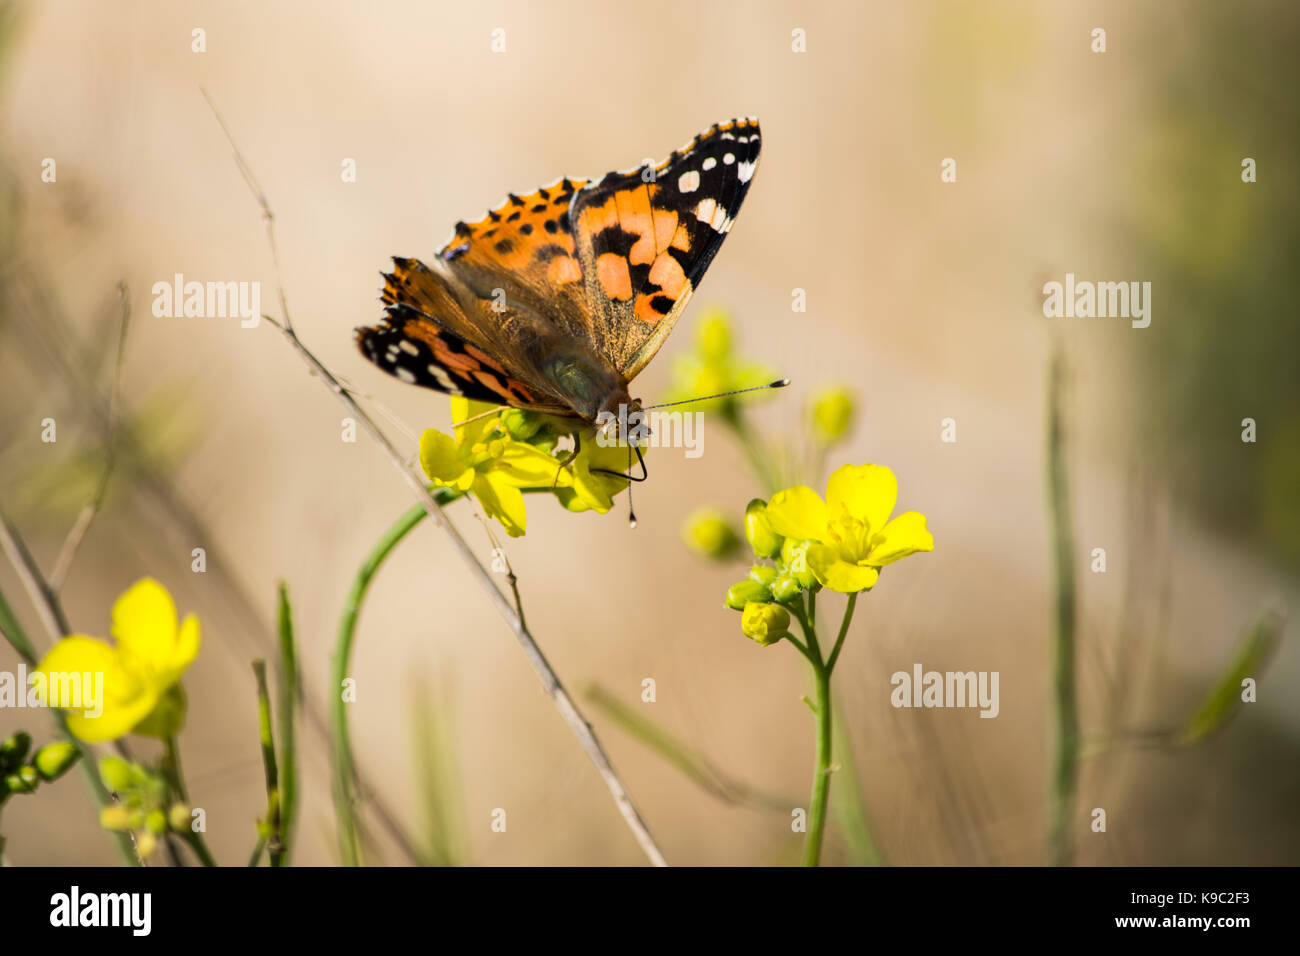 A Painted Lady Butterfly, Vanessa cardui, extracting pollen from a Perennial Wall Rocket, Diplotaxis tenuifolia, in the Maltese countryside, Malta Stock Photo